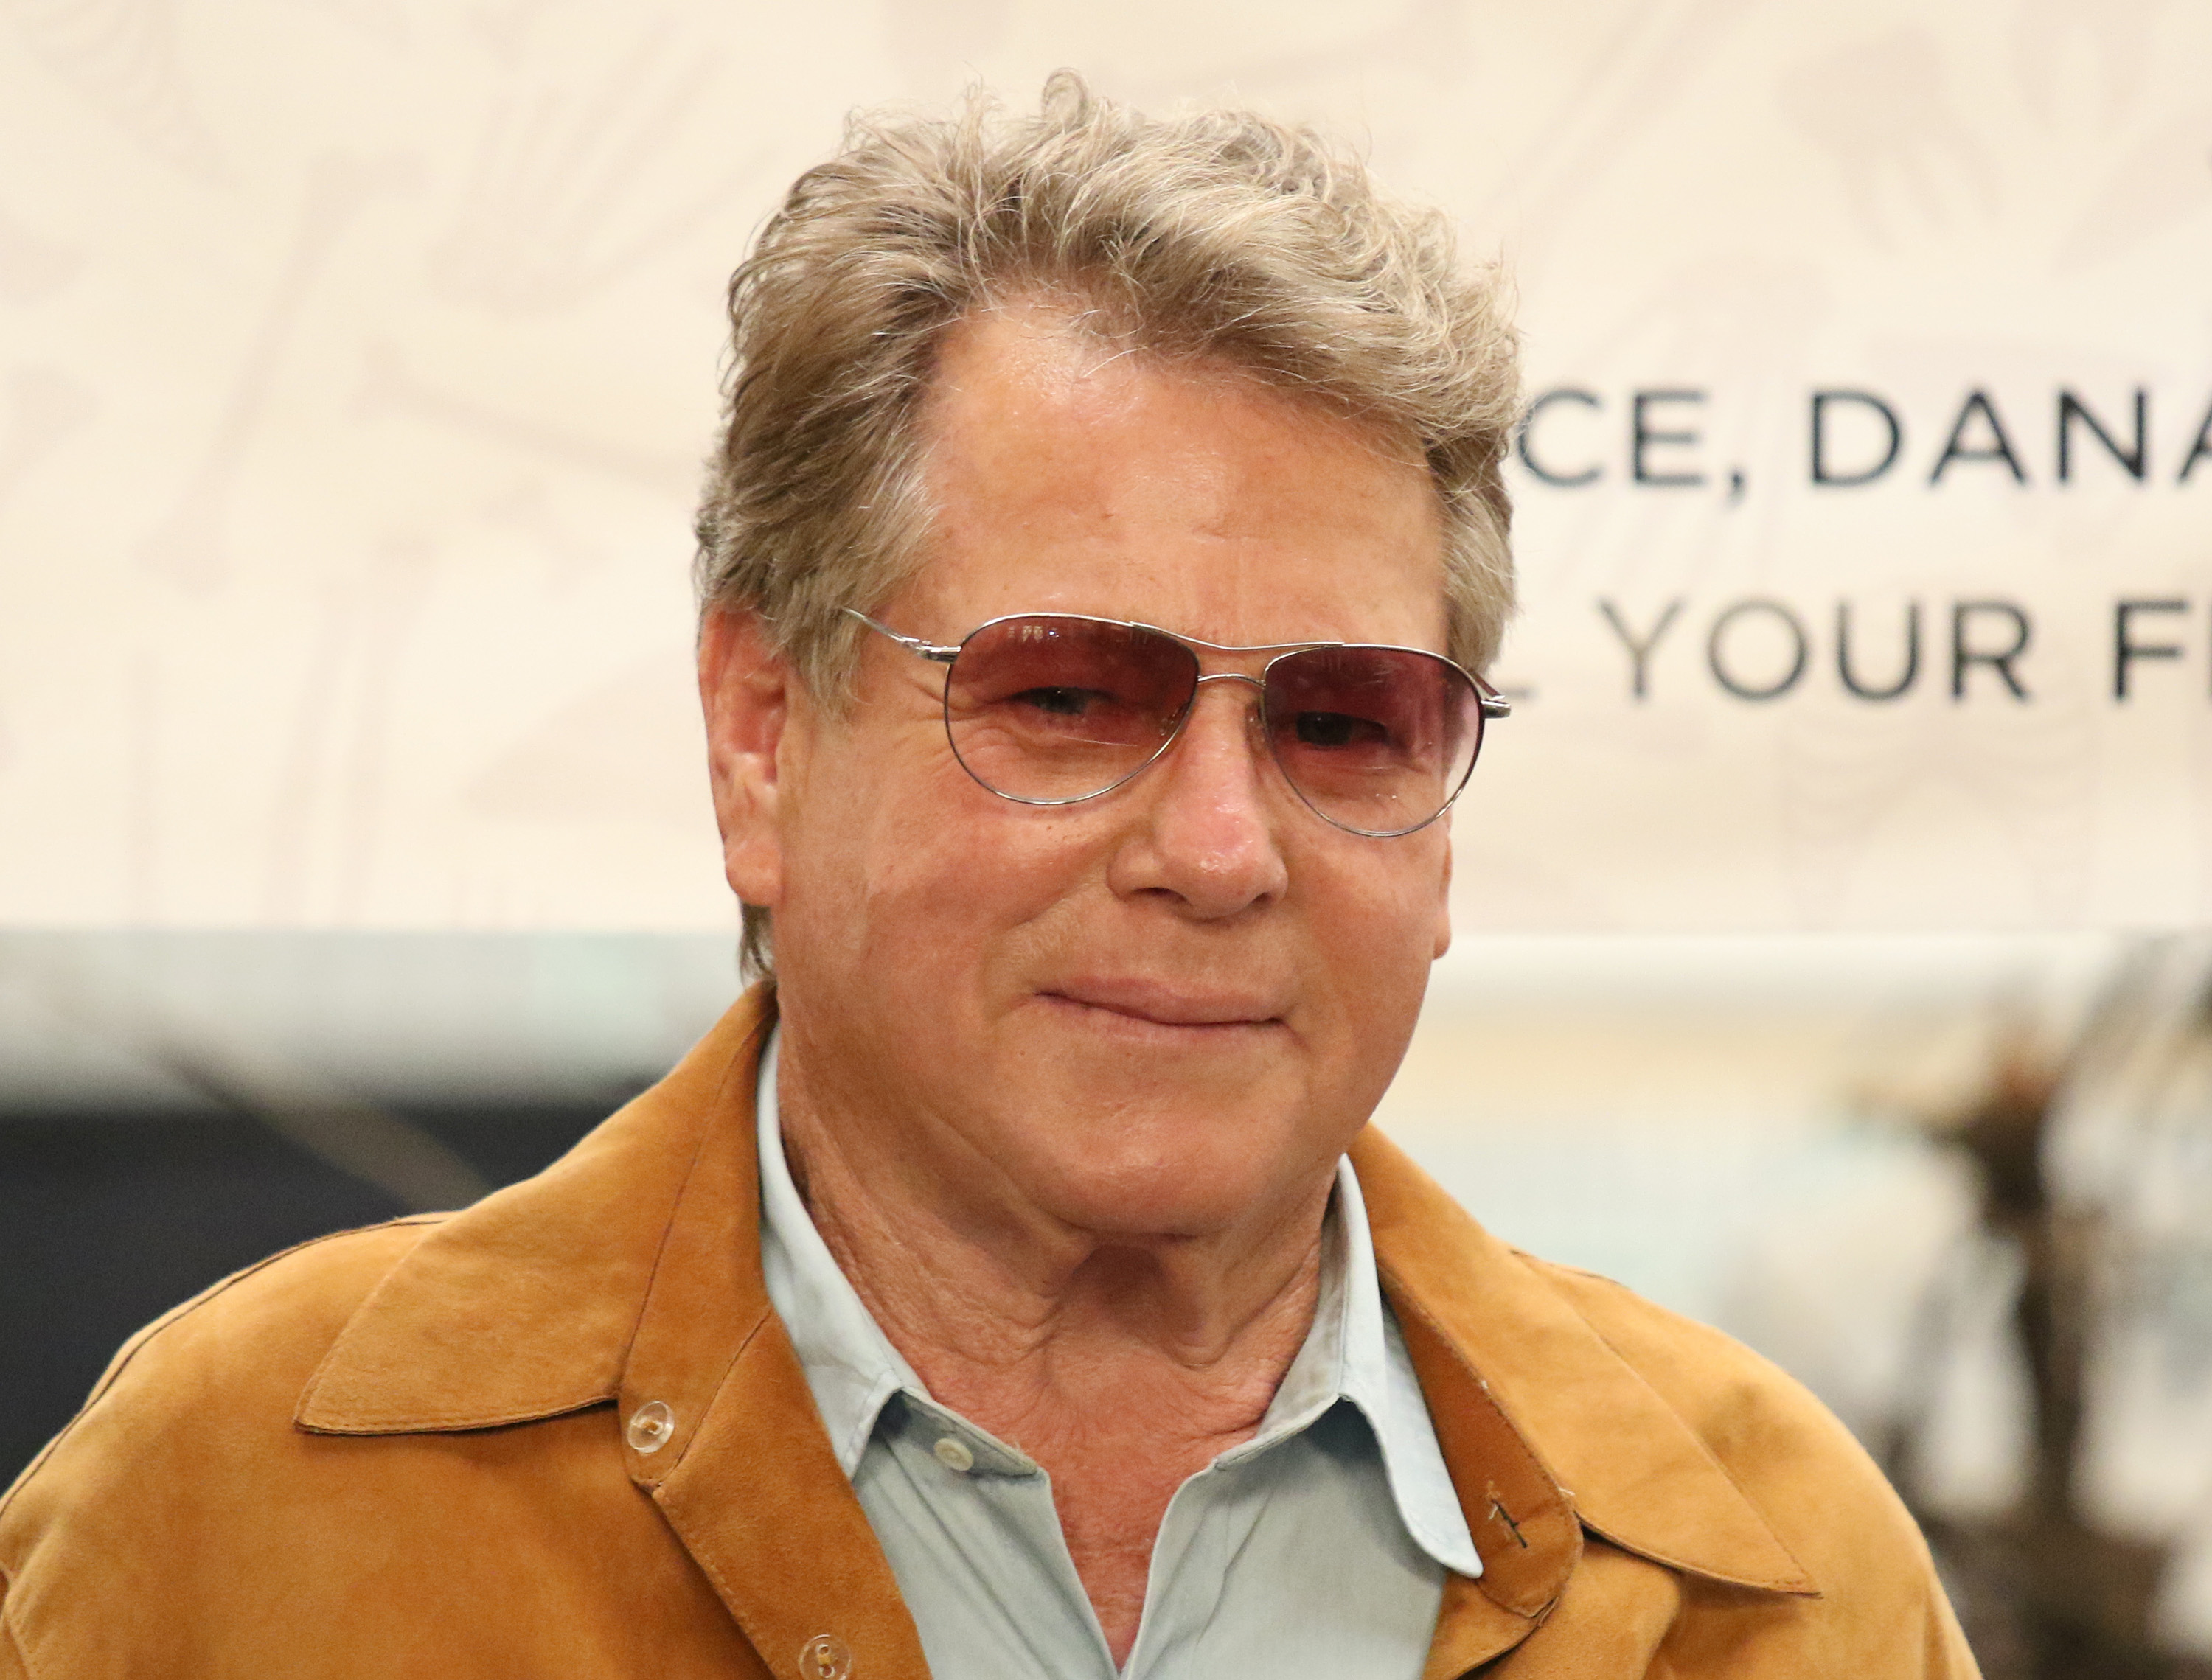 Ryan O'Neal was best known for playing Rodney Harrington on the ABC nighttime soap opera Peyton Place.